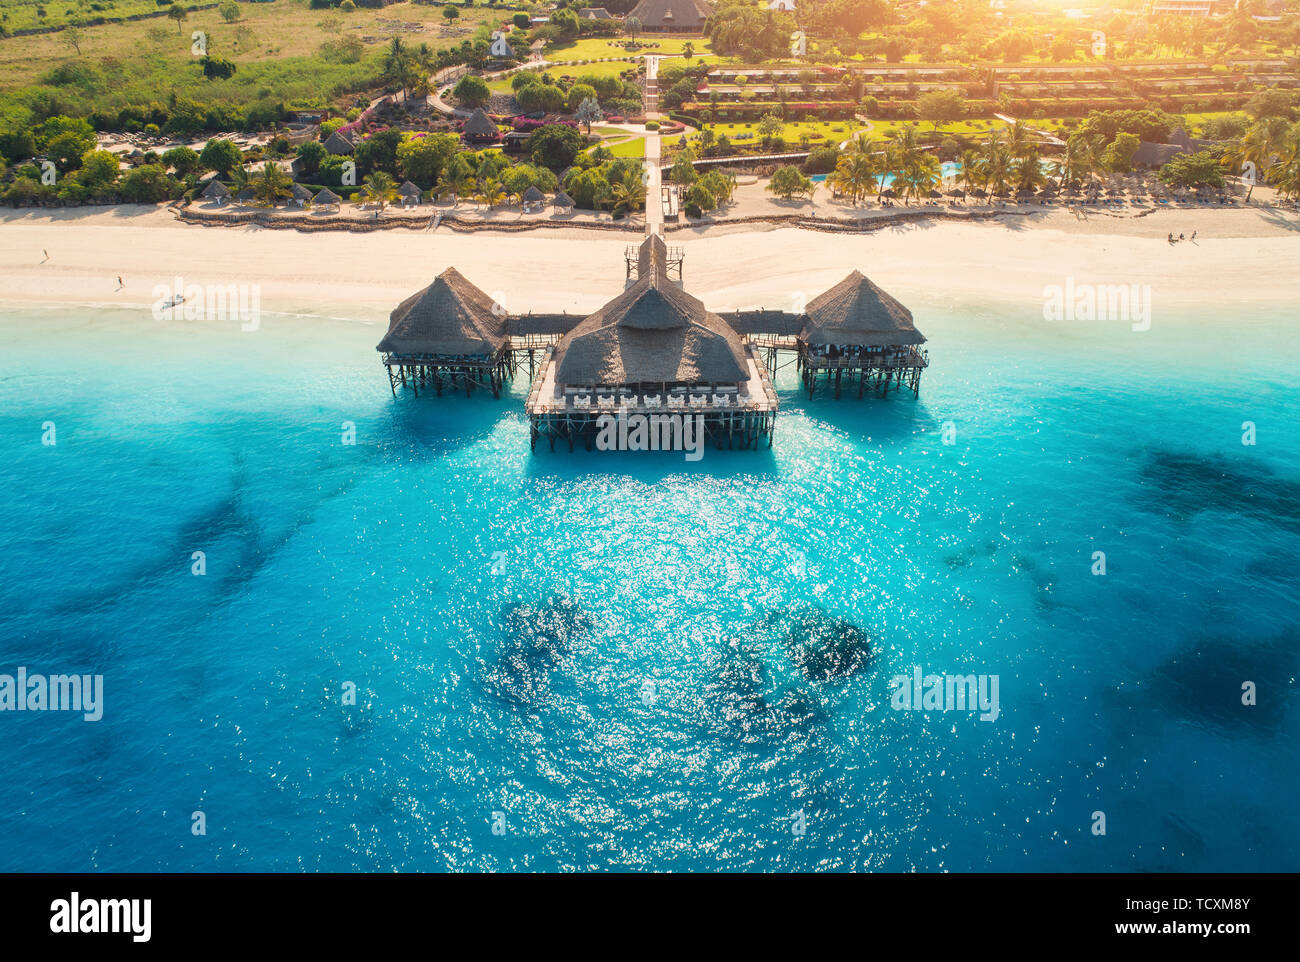 Aerial view of beautiful hotel in Indian ocean at sunset in summer Stock Photo